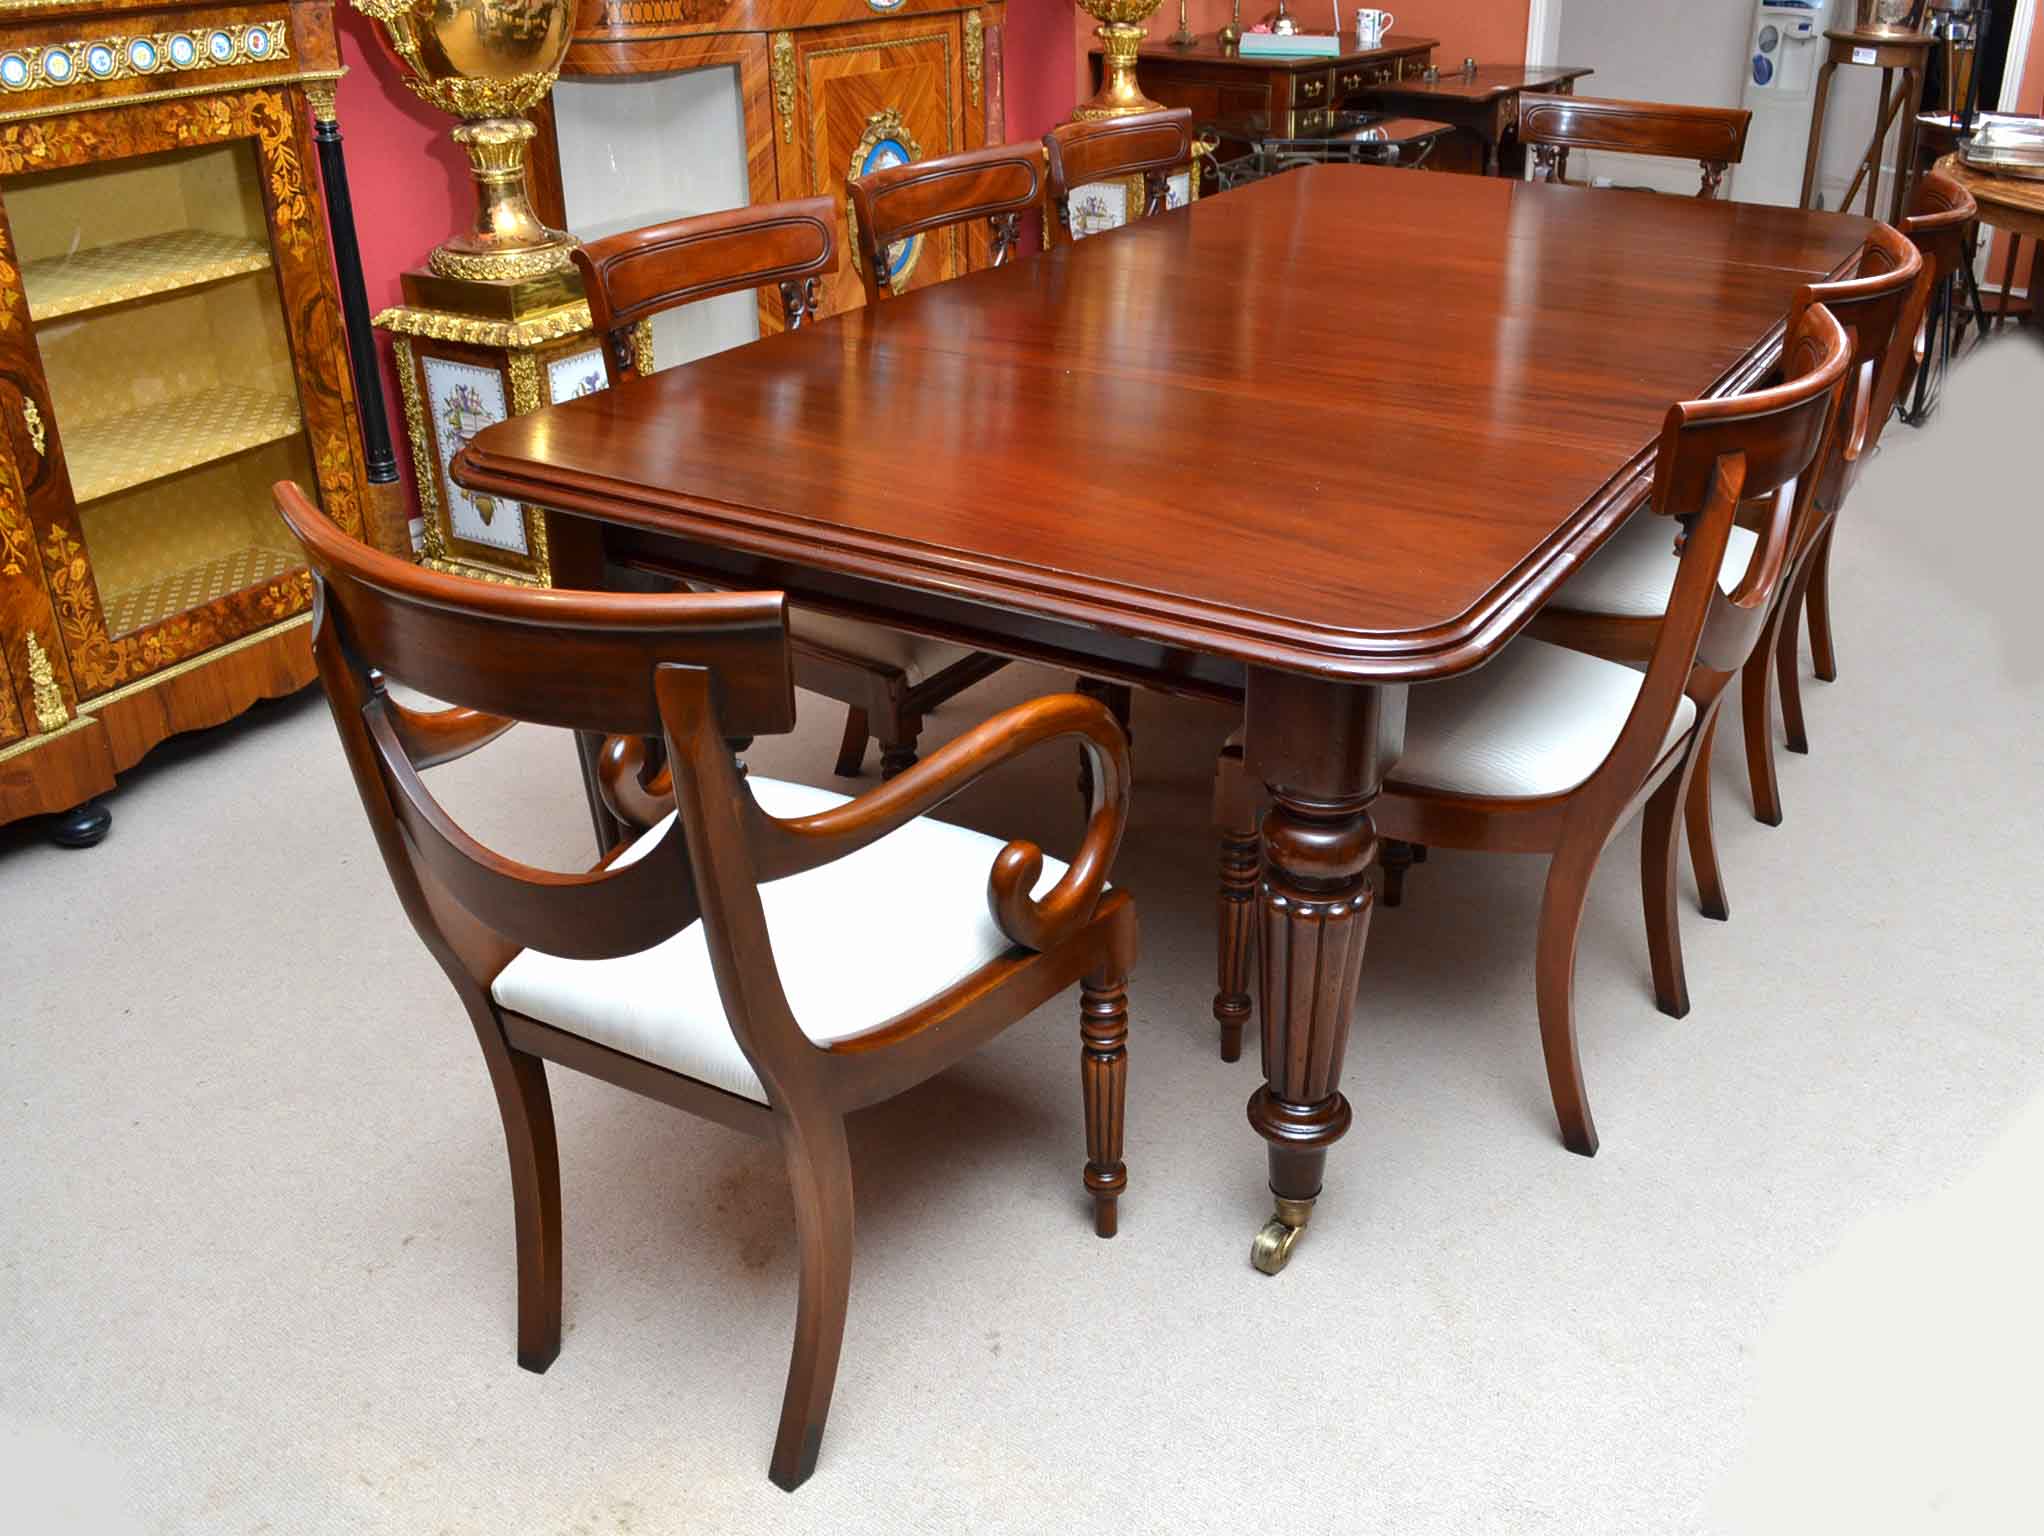 Revit Dining Room Table With Chairs / Narrow Dining Tables - HomesFeed